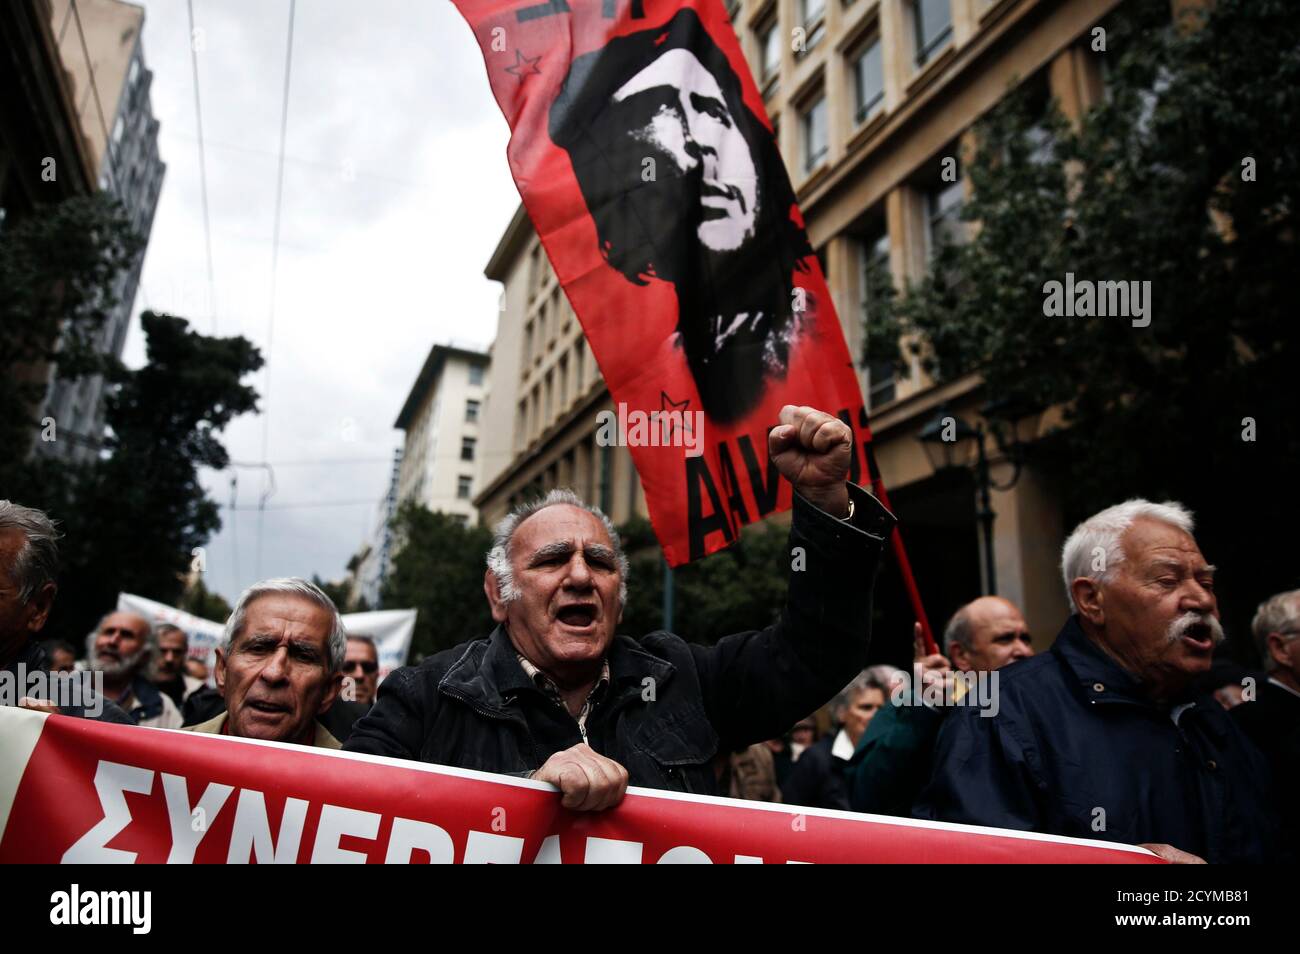 Pensioners march holding a banner and flag bearing an image of Cuban  revolutionary leader Che Guevara, during an anti-austerity rally in Athens  April 19, 2013. Greeks have lost almost a third of